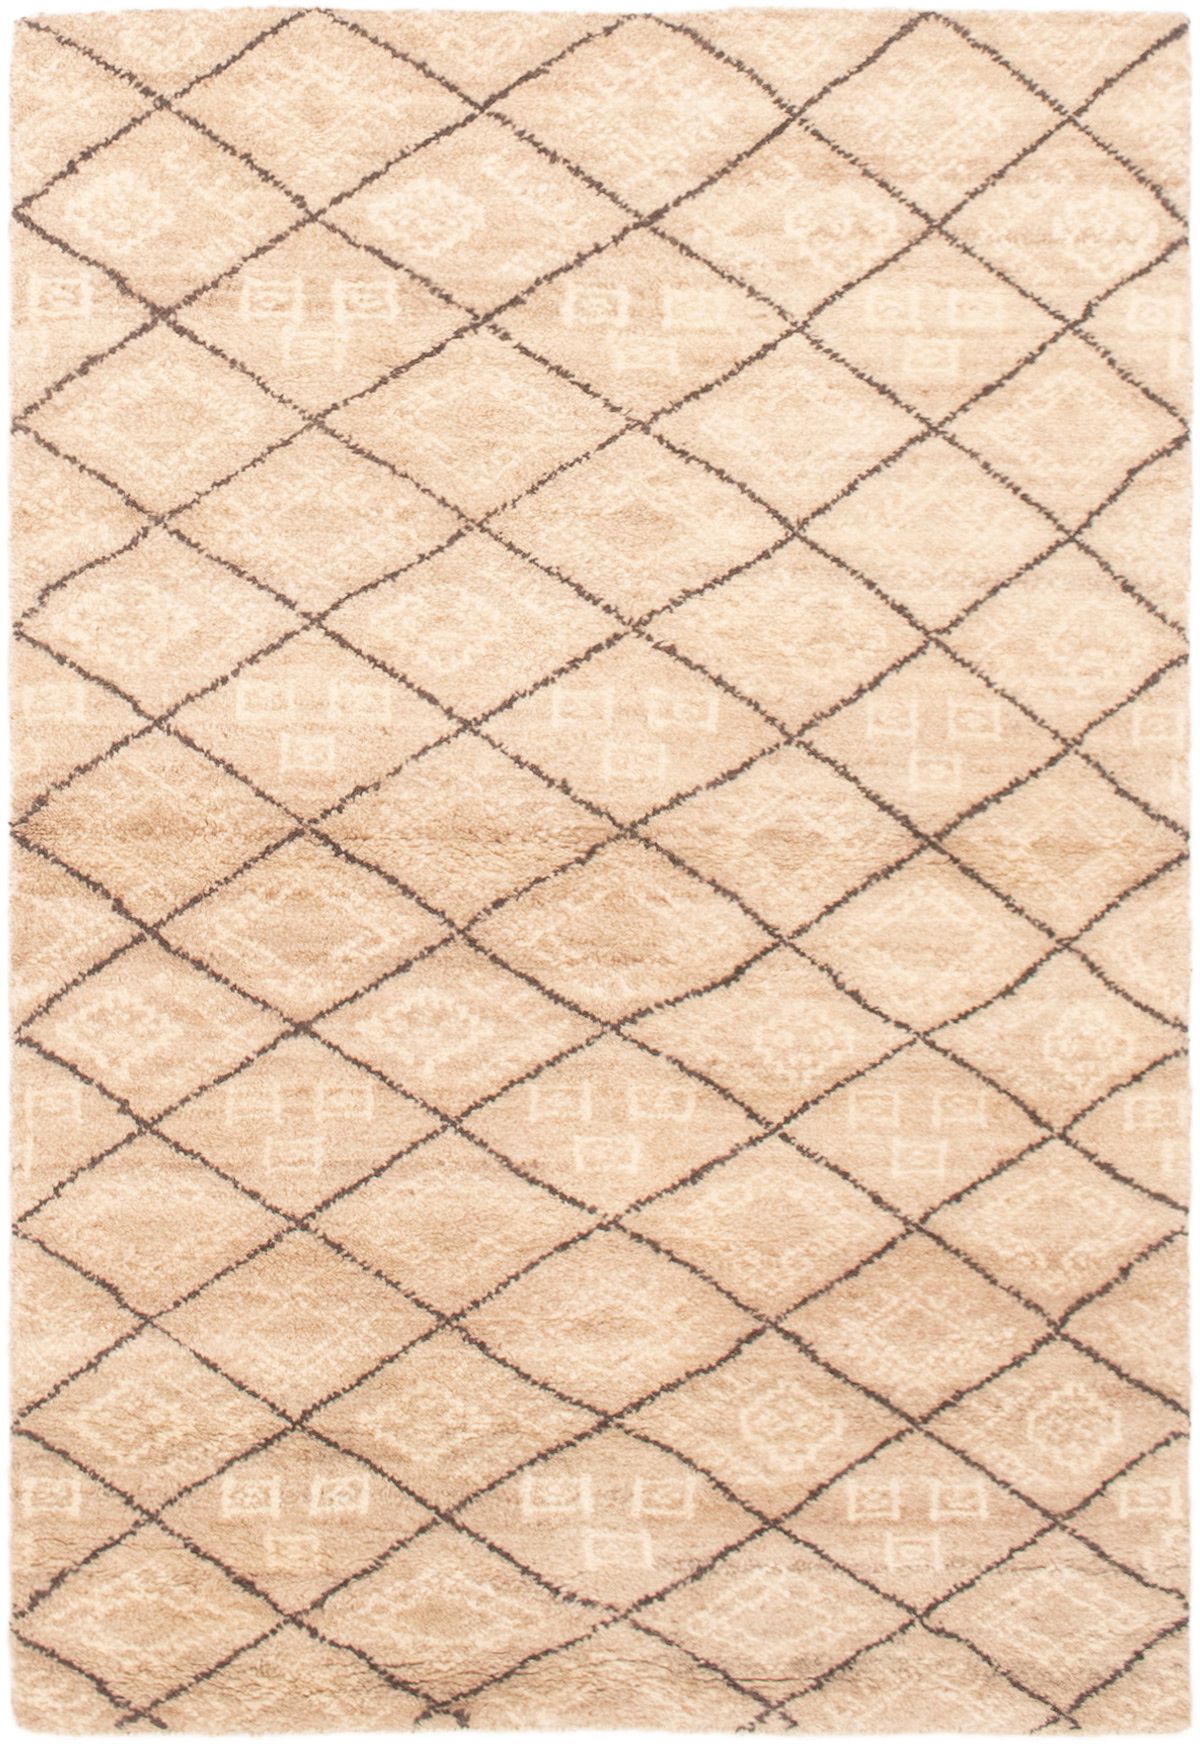 Hand-knotted Tangier Tan Wool Rug 4'6" x 6'7" Size: 4'6" x 6'7"  